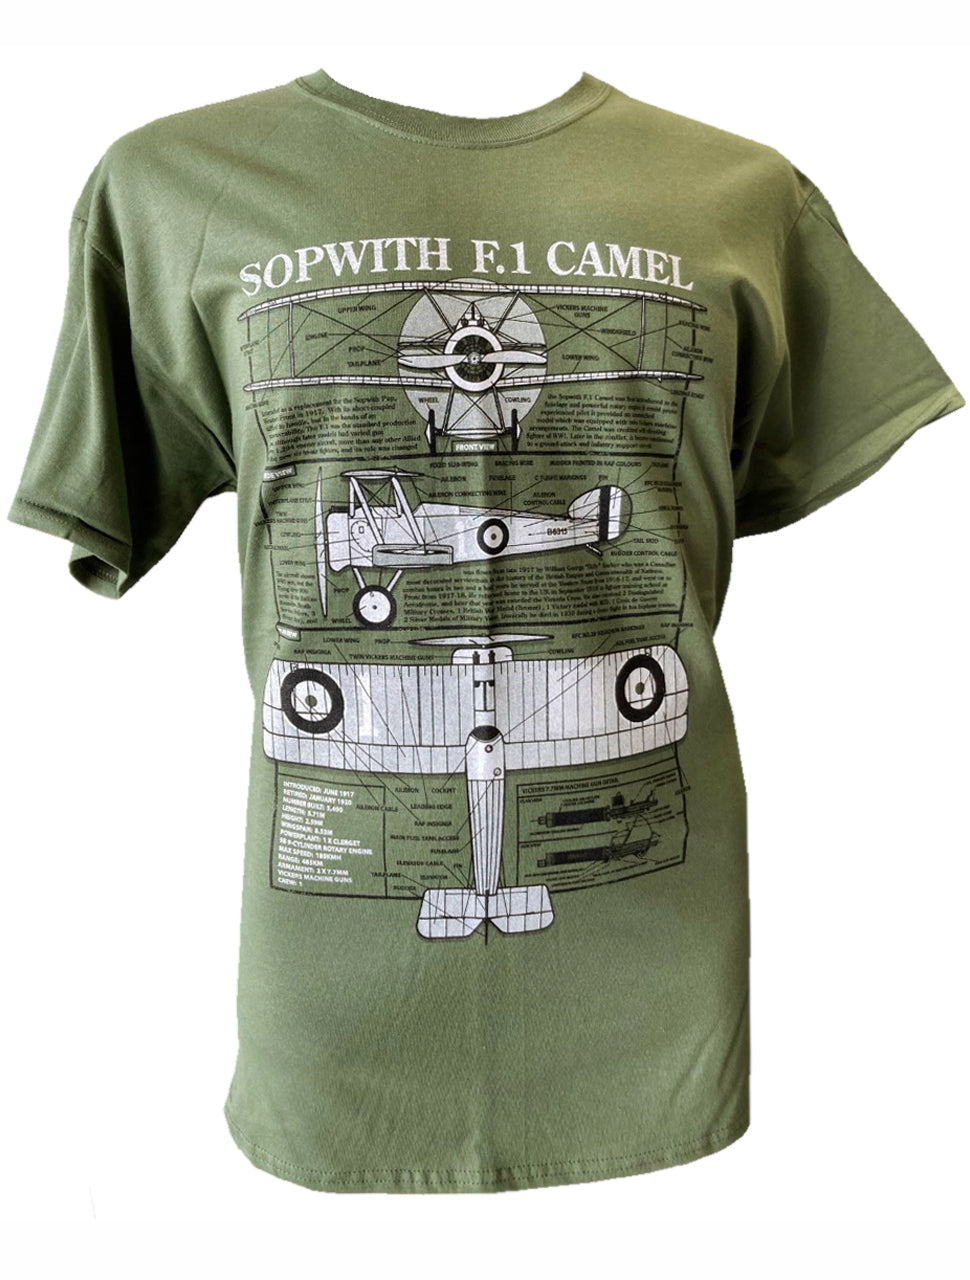 Sopwith Camel Biplane (Blueprint Design) T-shirt  LIMITED AVAILABILITY - WHEN IT'S GONE IT'S GONE!